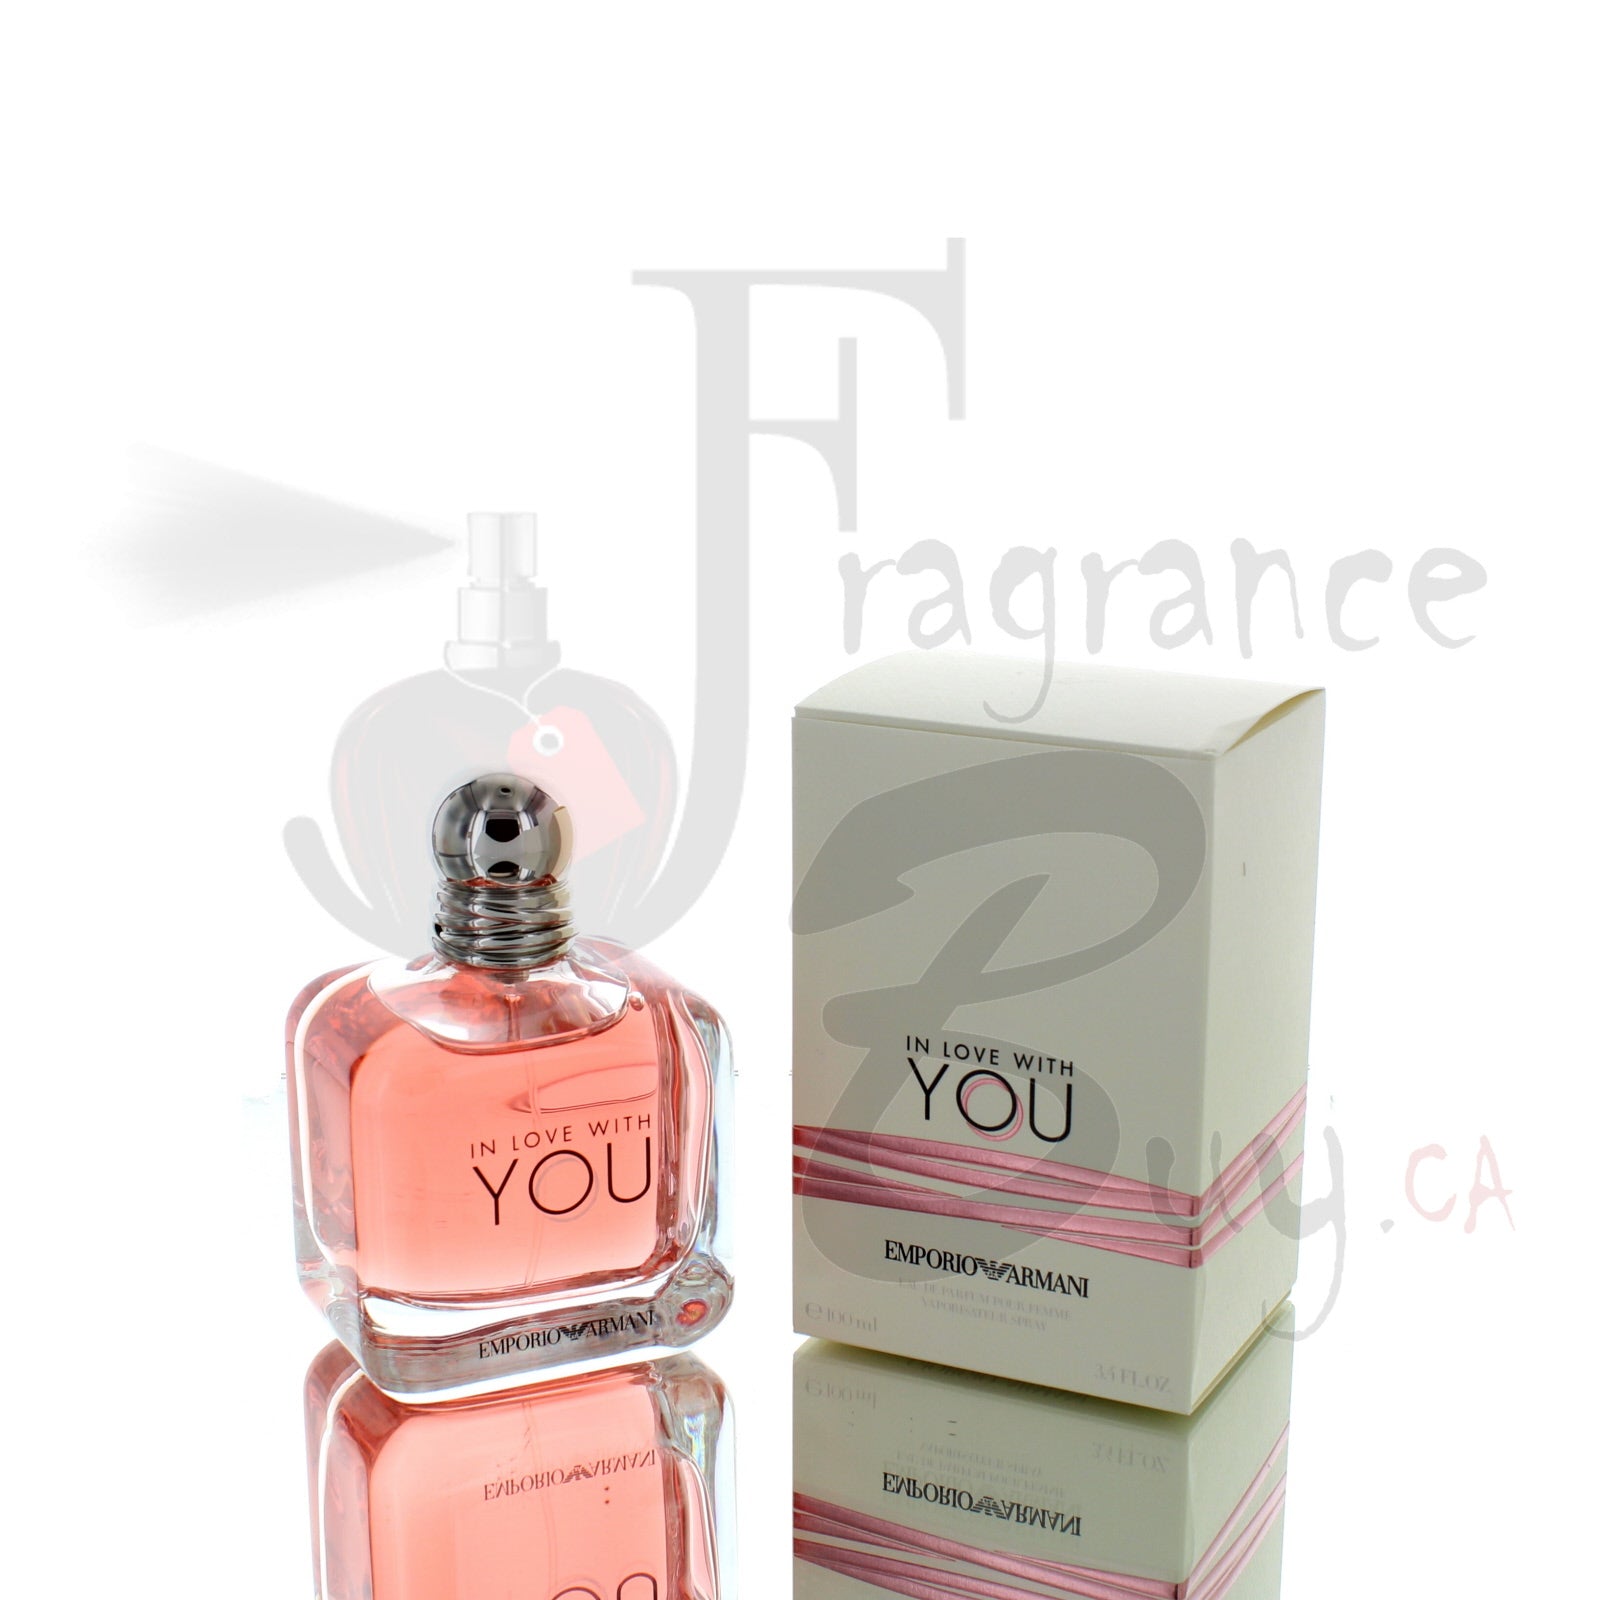  — Emporio Armani In Love With You | Best Price,  Fragrancebuy Canada